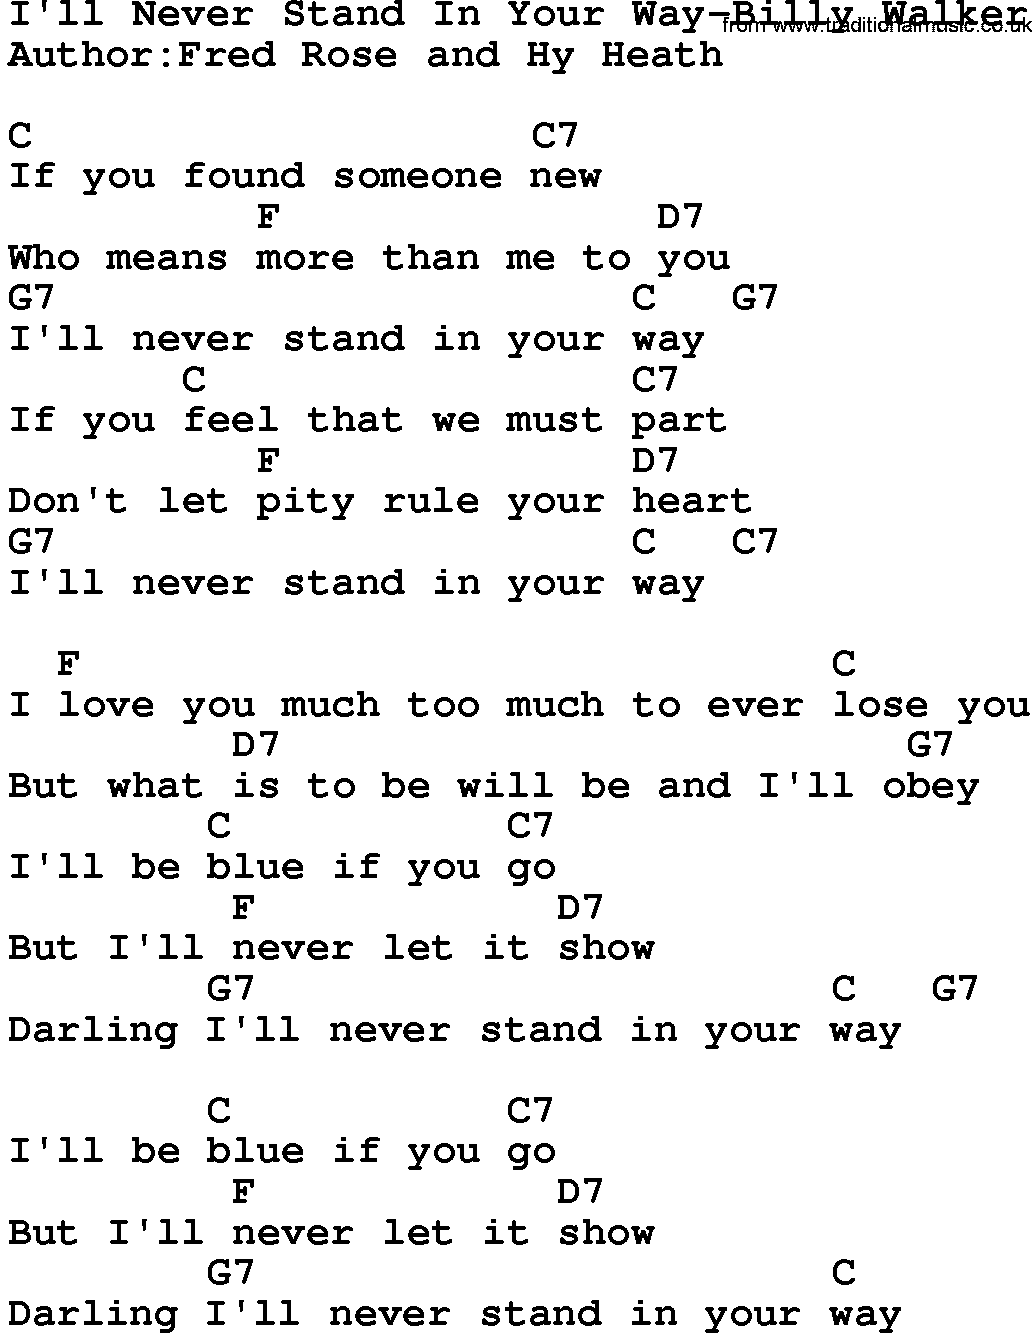 Country music song: I'll Never Stand In Your Way-Billy Walker lyrics and chords